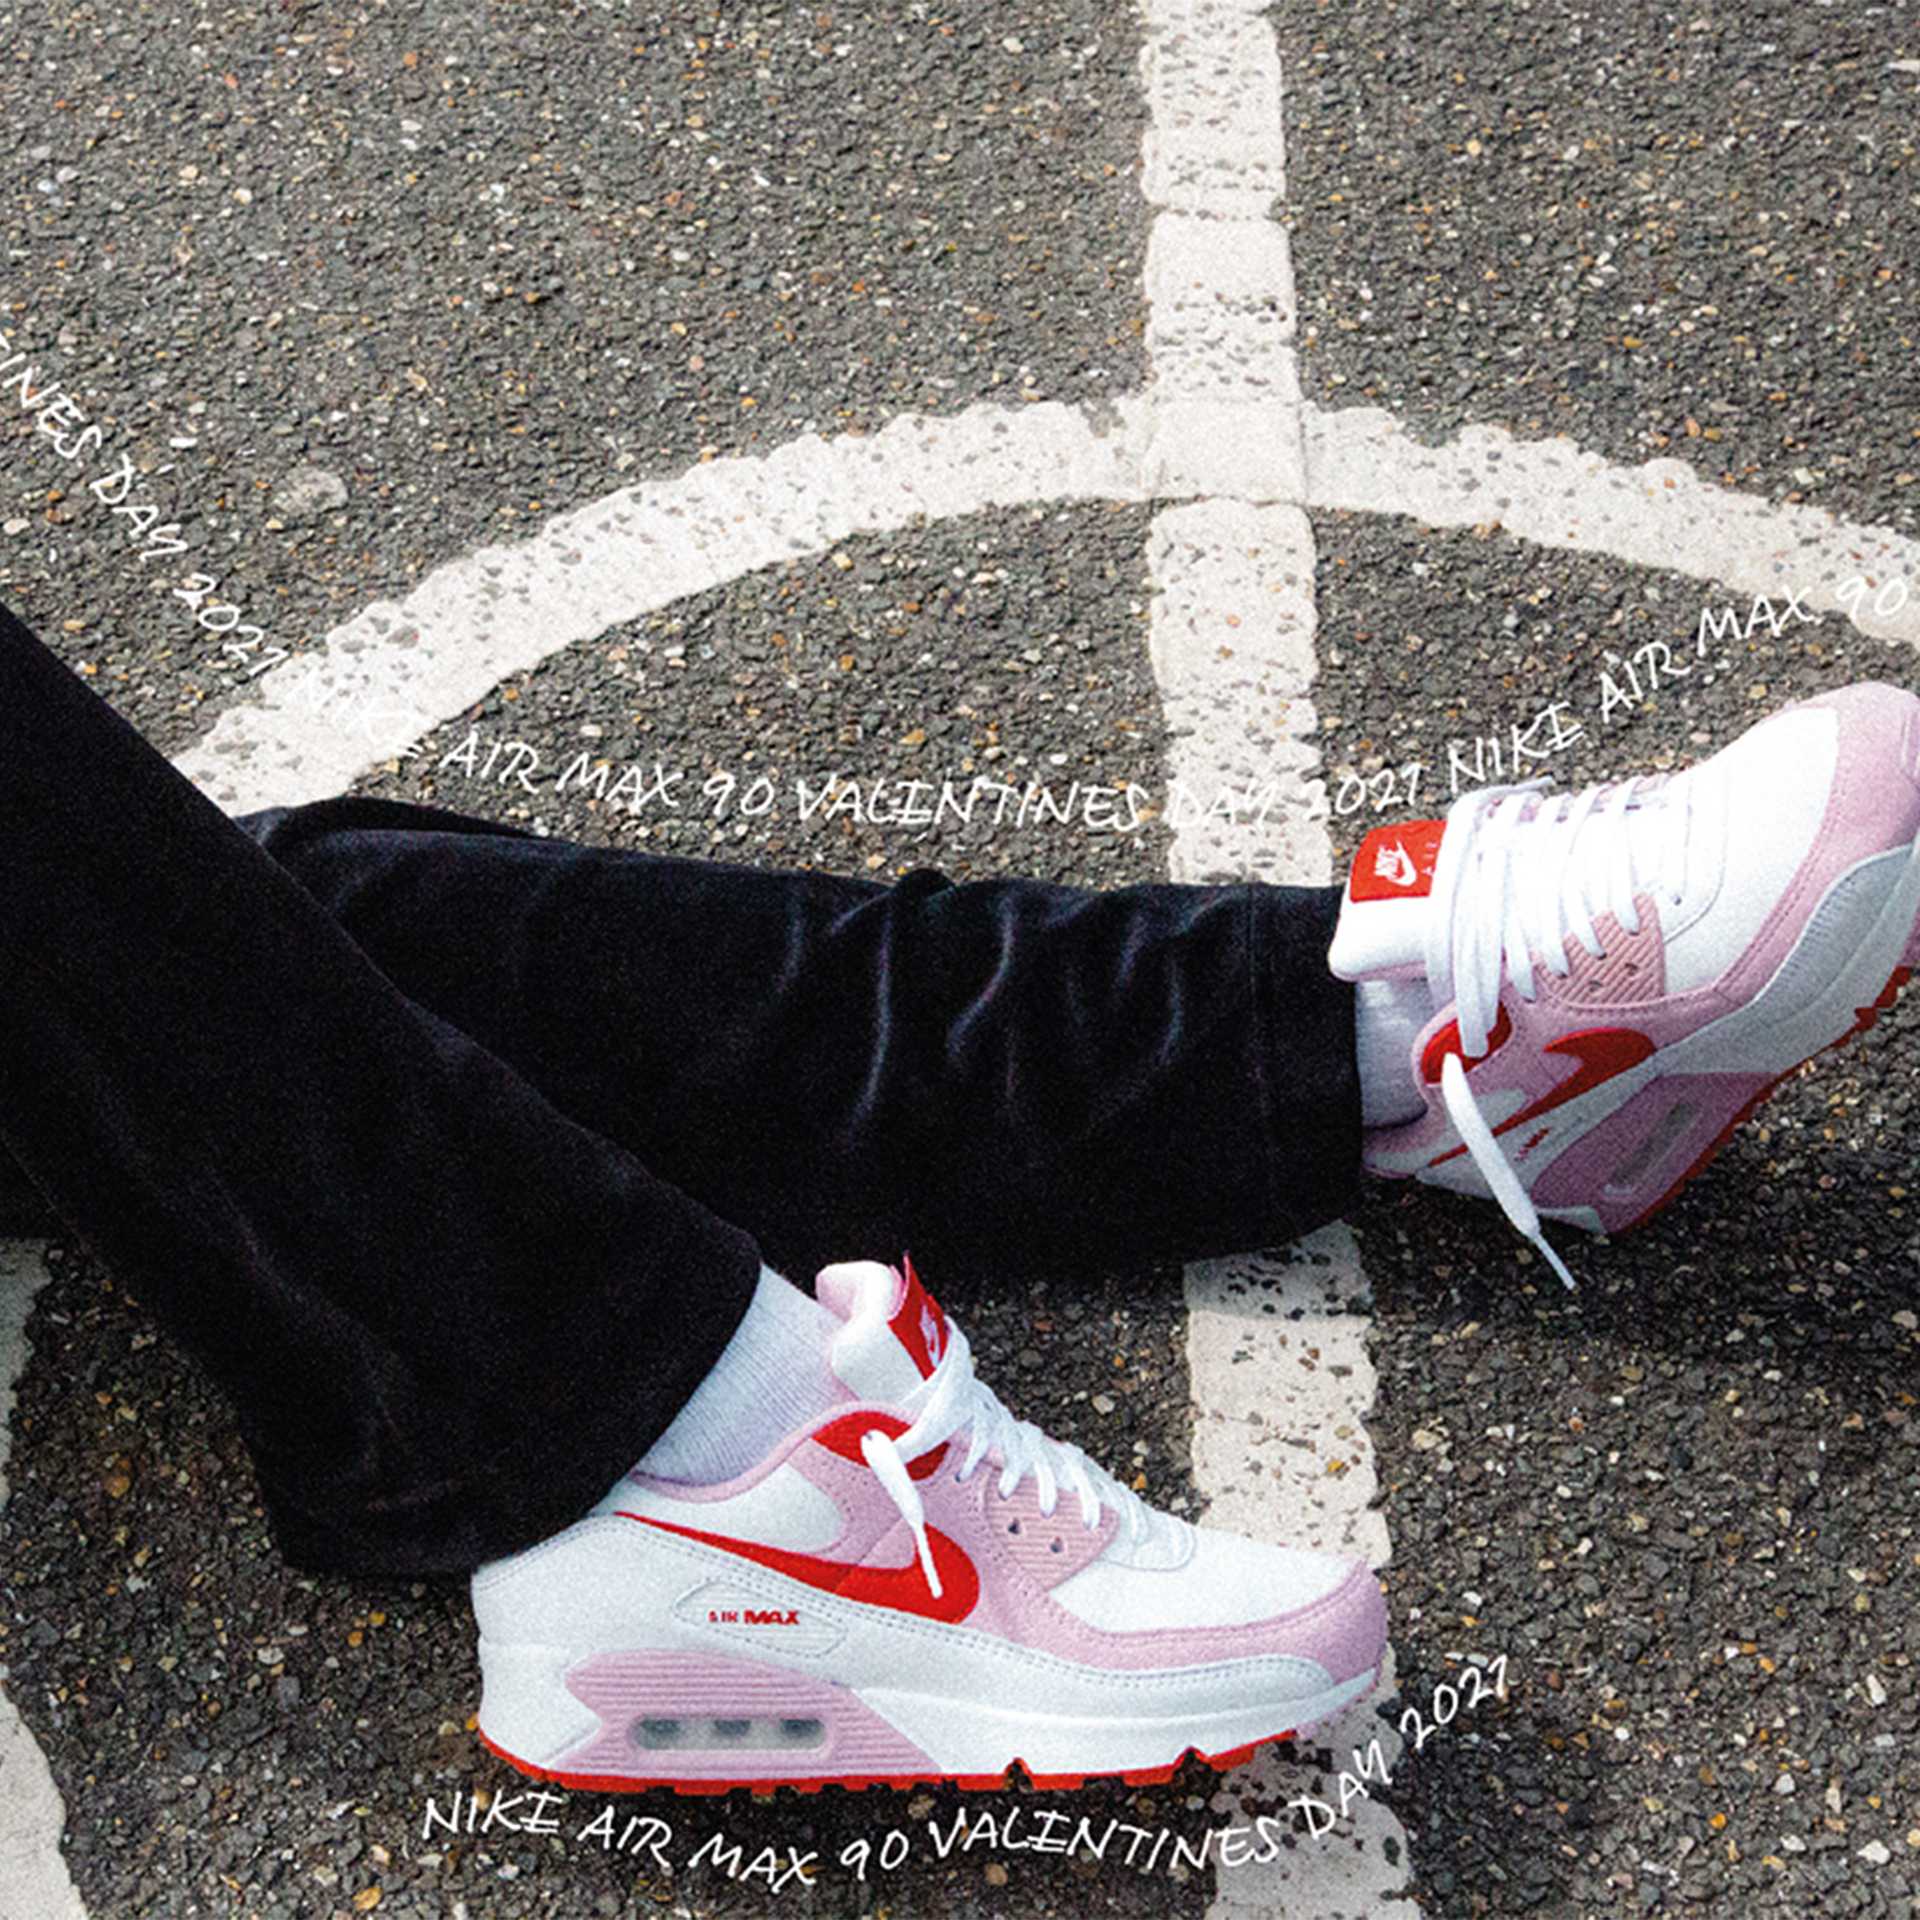 Nike Air Max 90 Valentines Day